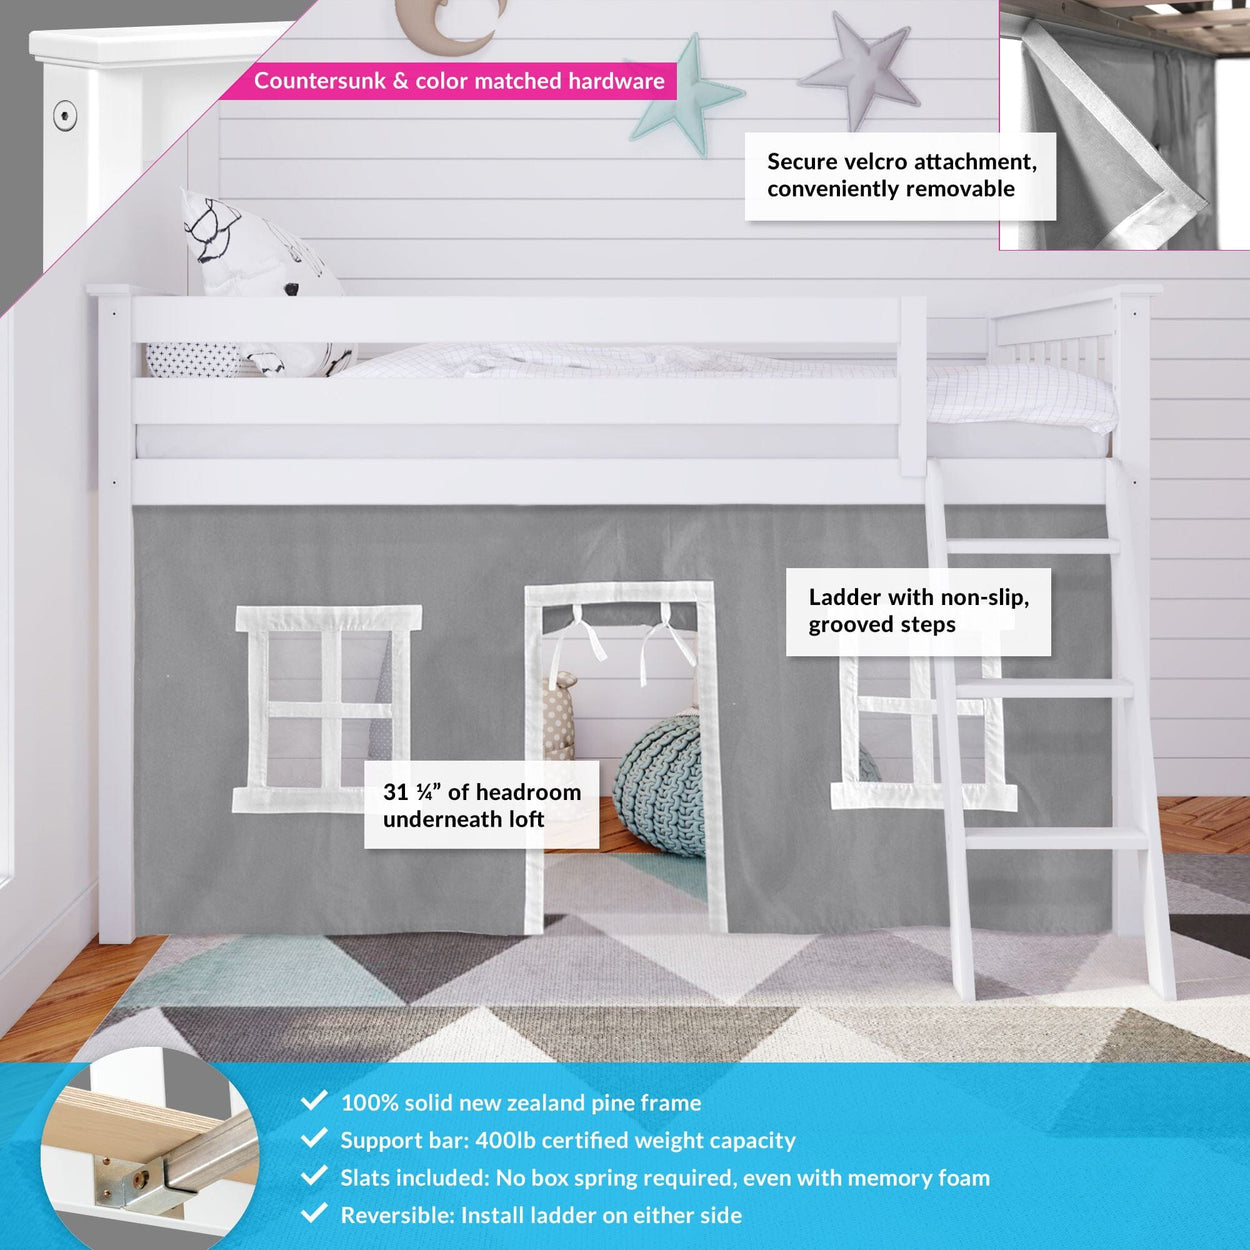 180212002054 : Loft Beds Twin-Size Low Loft With Curtain, White + Grey Curtain